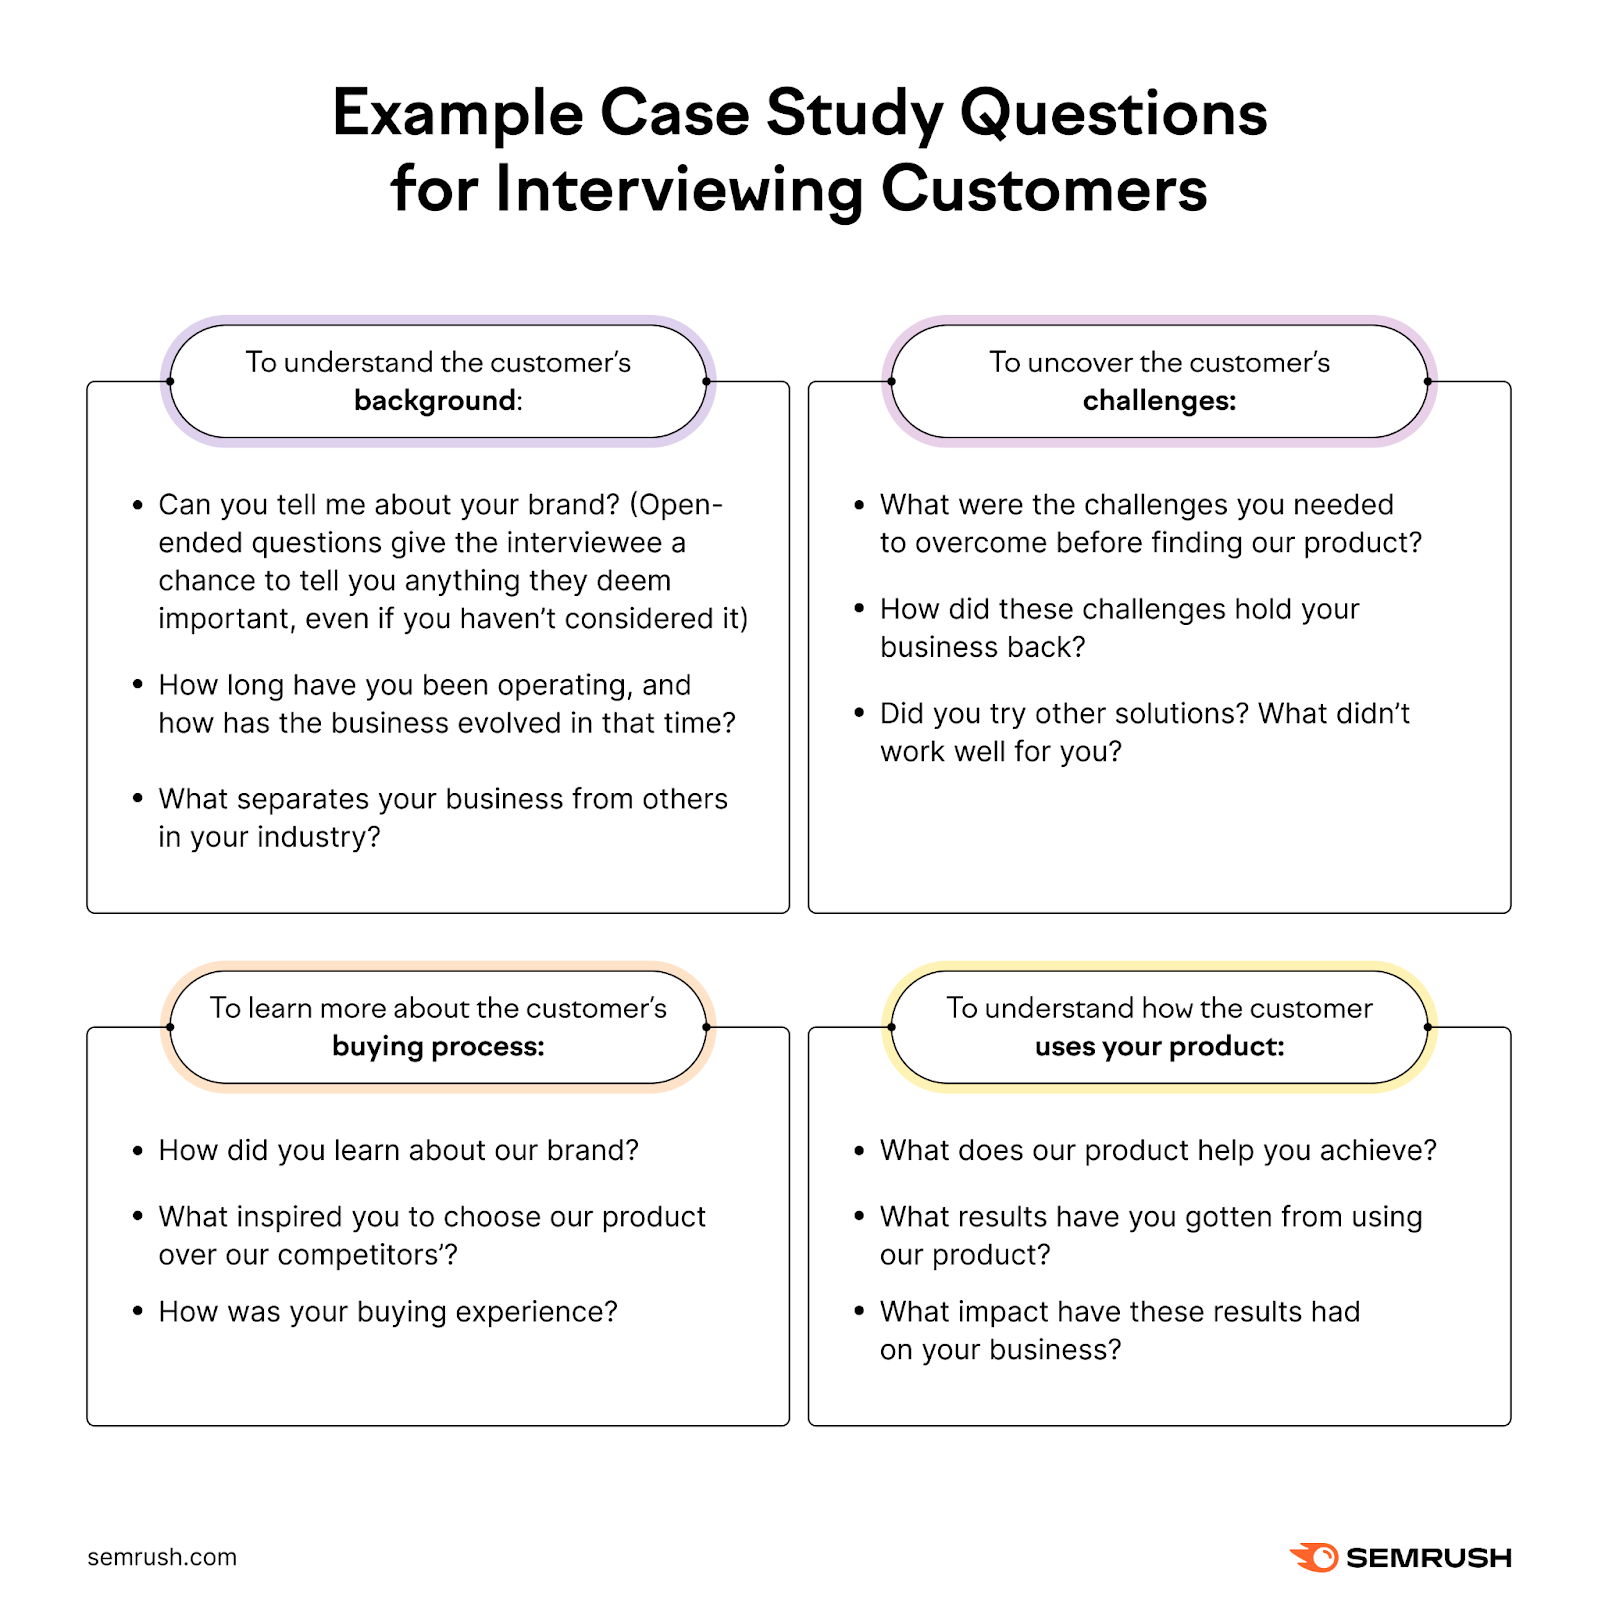 Example case study questions for interviewing customers